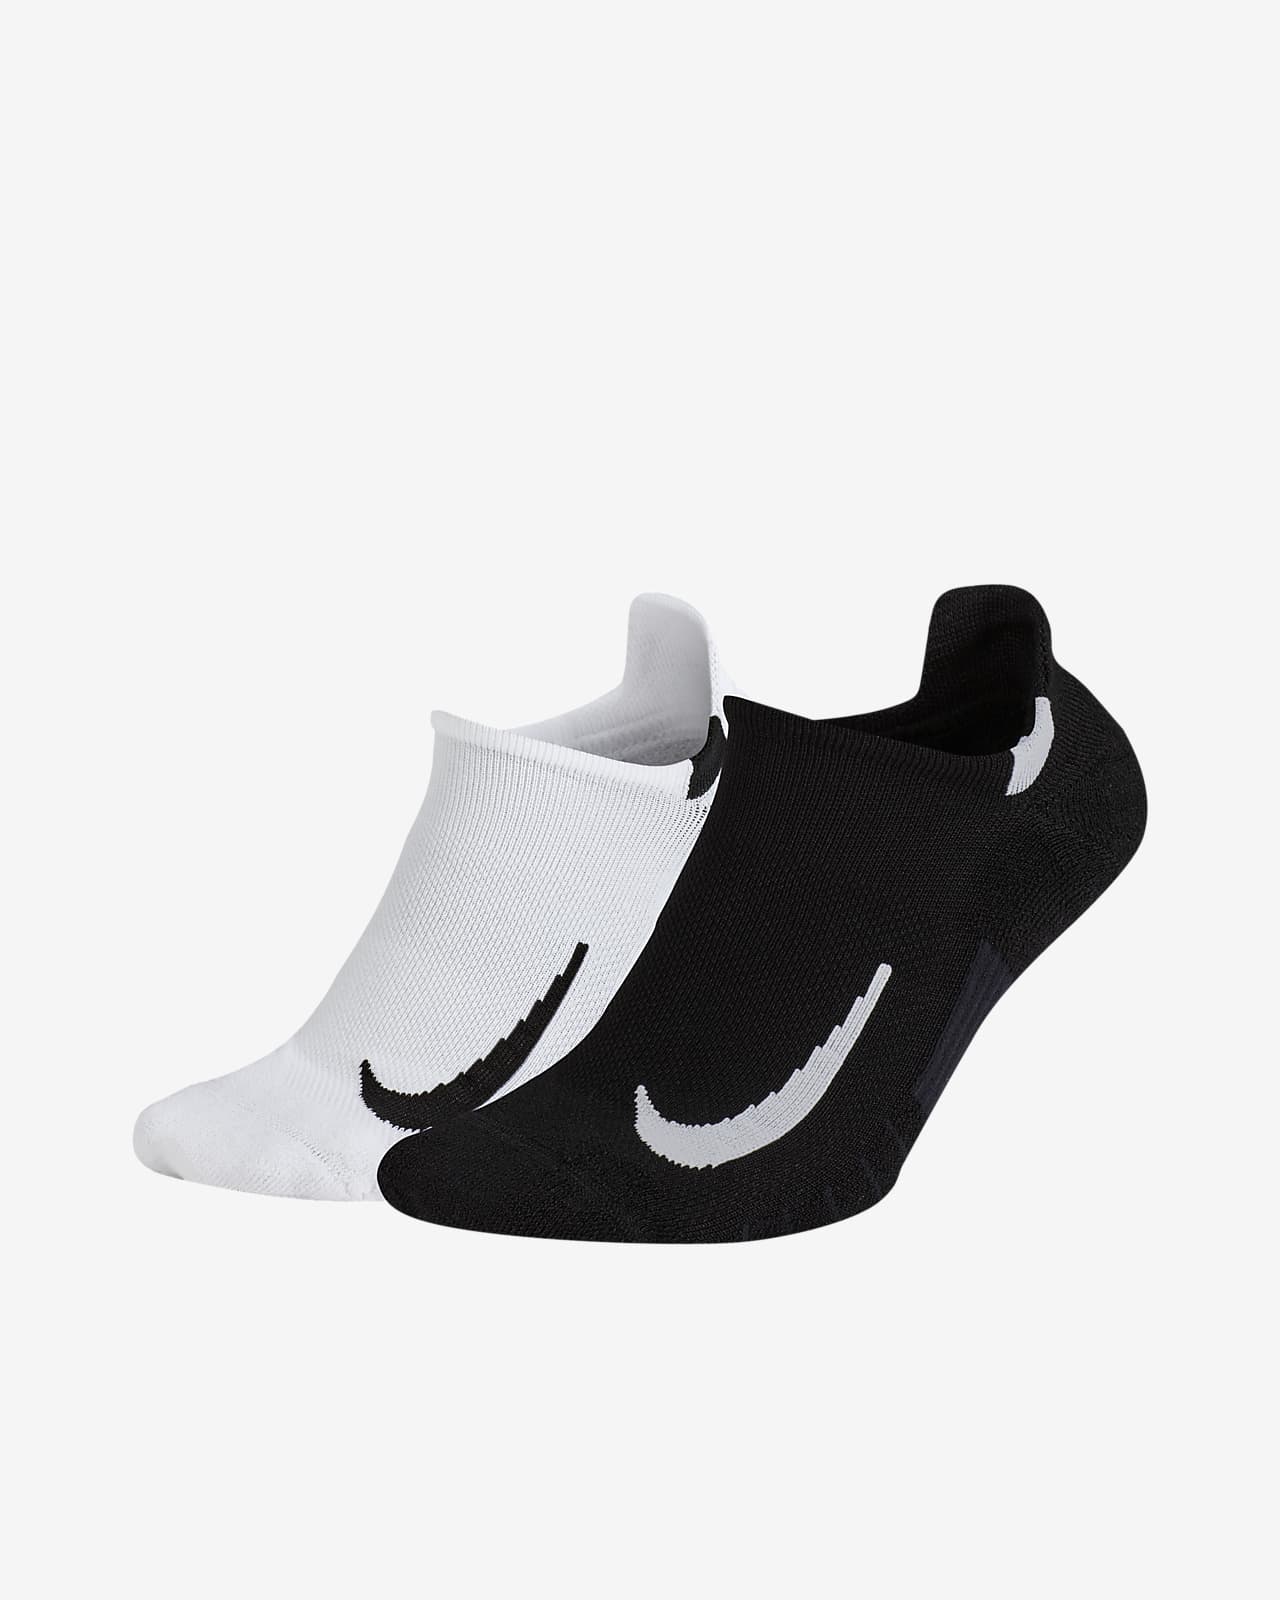 nike shoes without socks